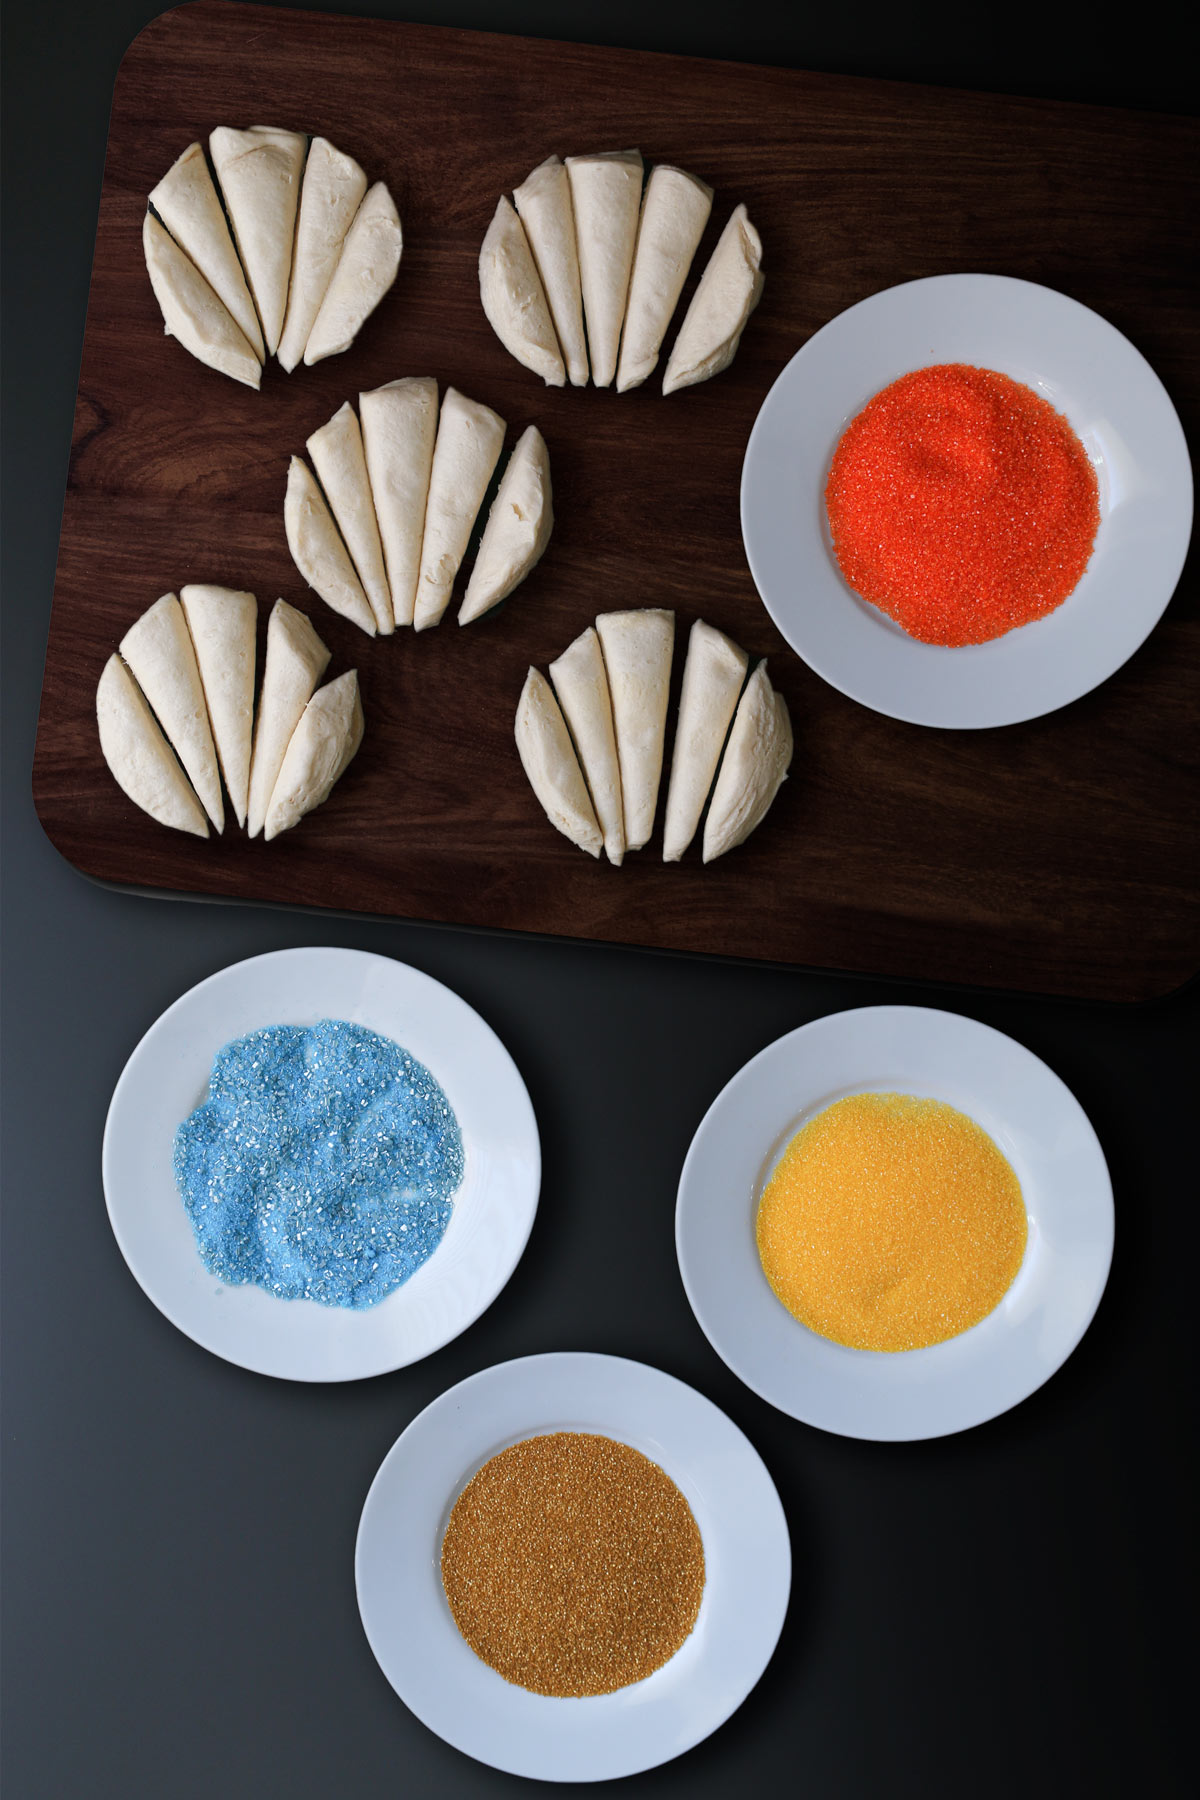 biscuit feathers on cutting board next to dishes of colored sugars.